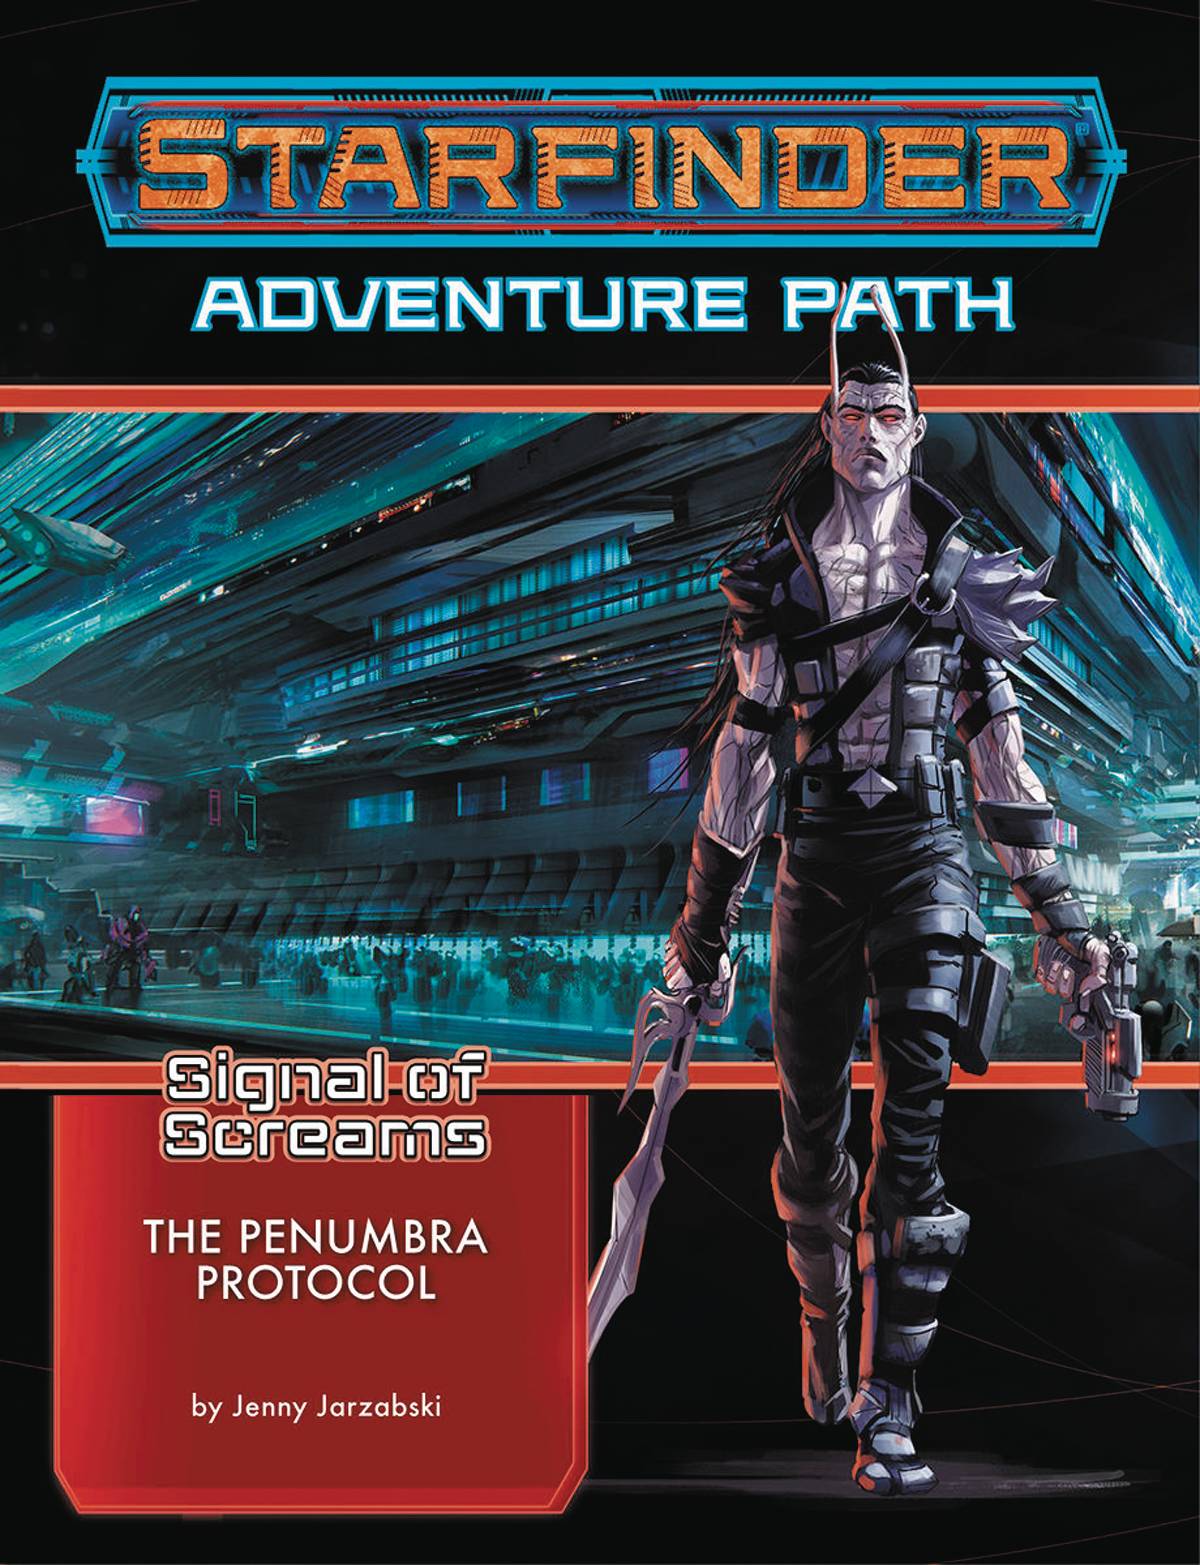 Starfinder Adventure Path Signal Soft Coverreams Part 2 of 3 Soft Cover